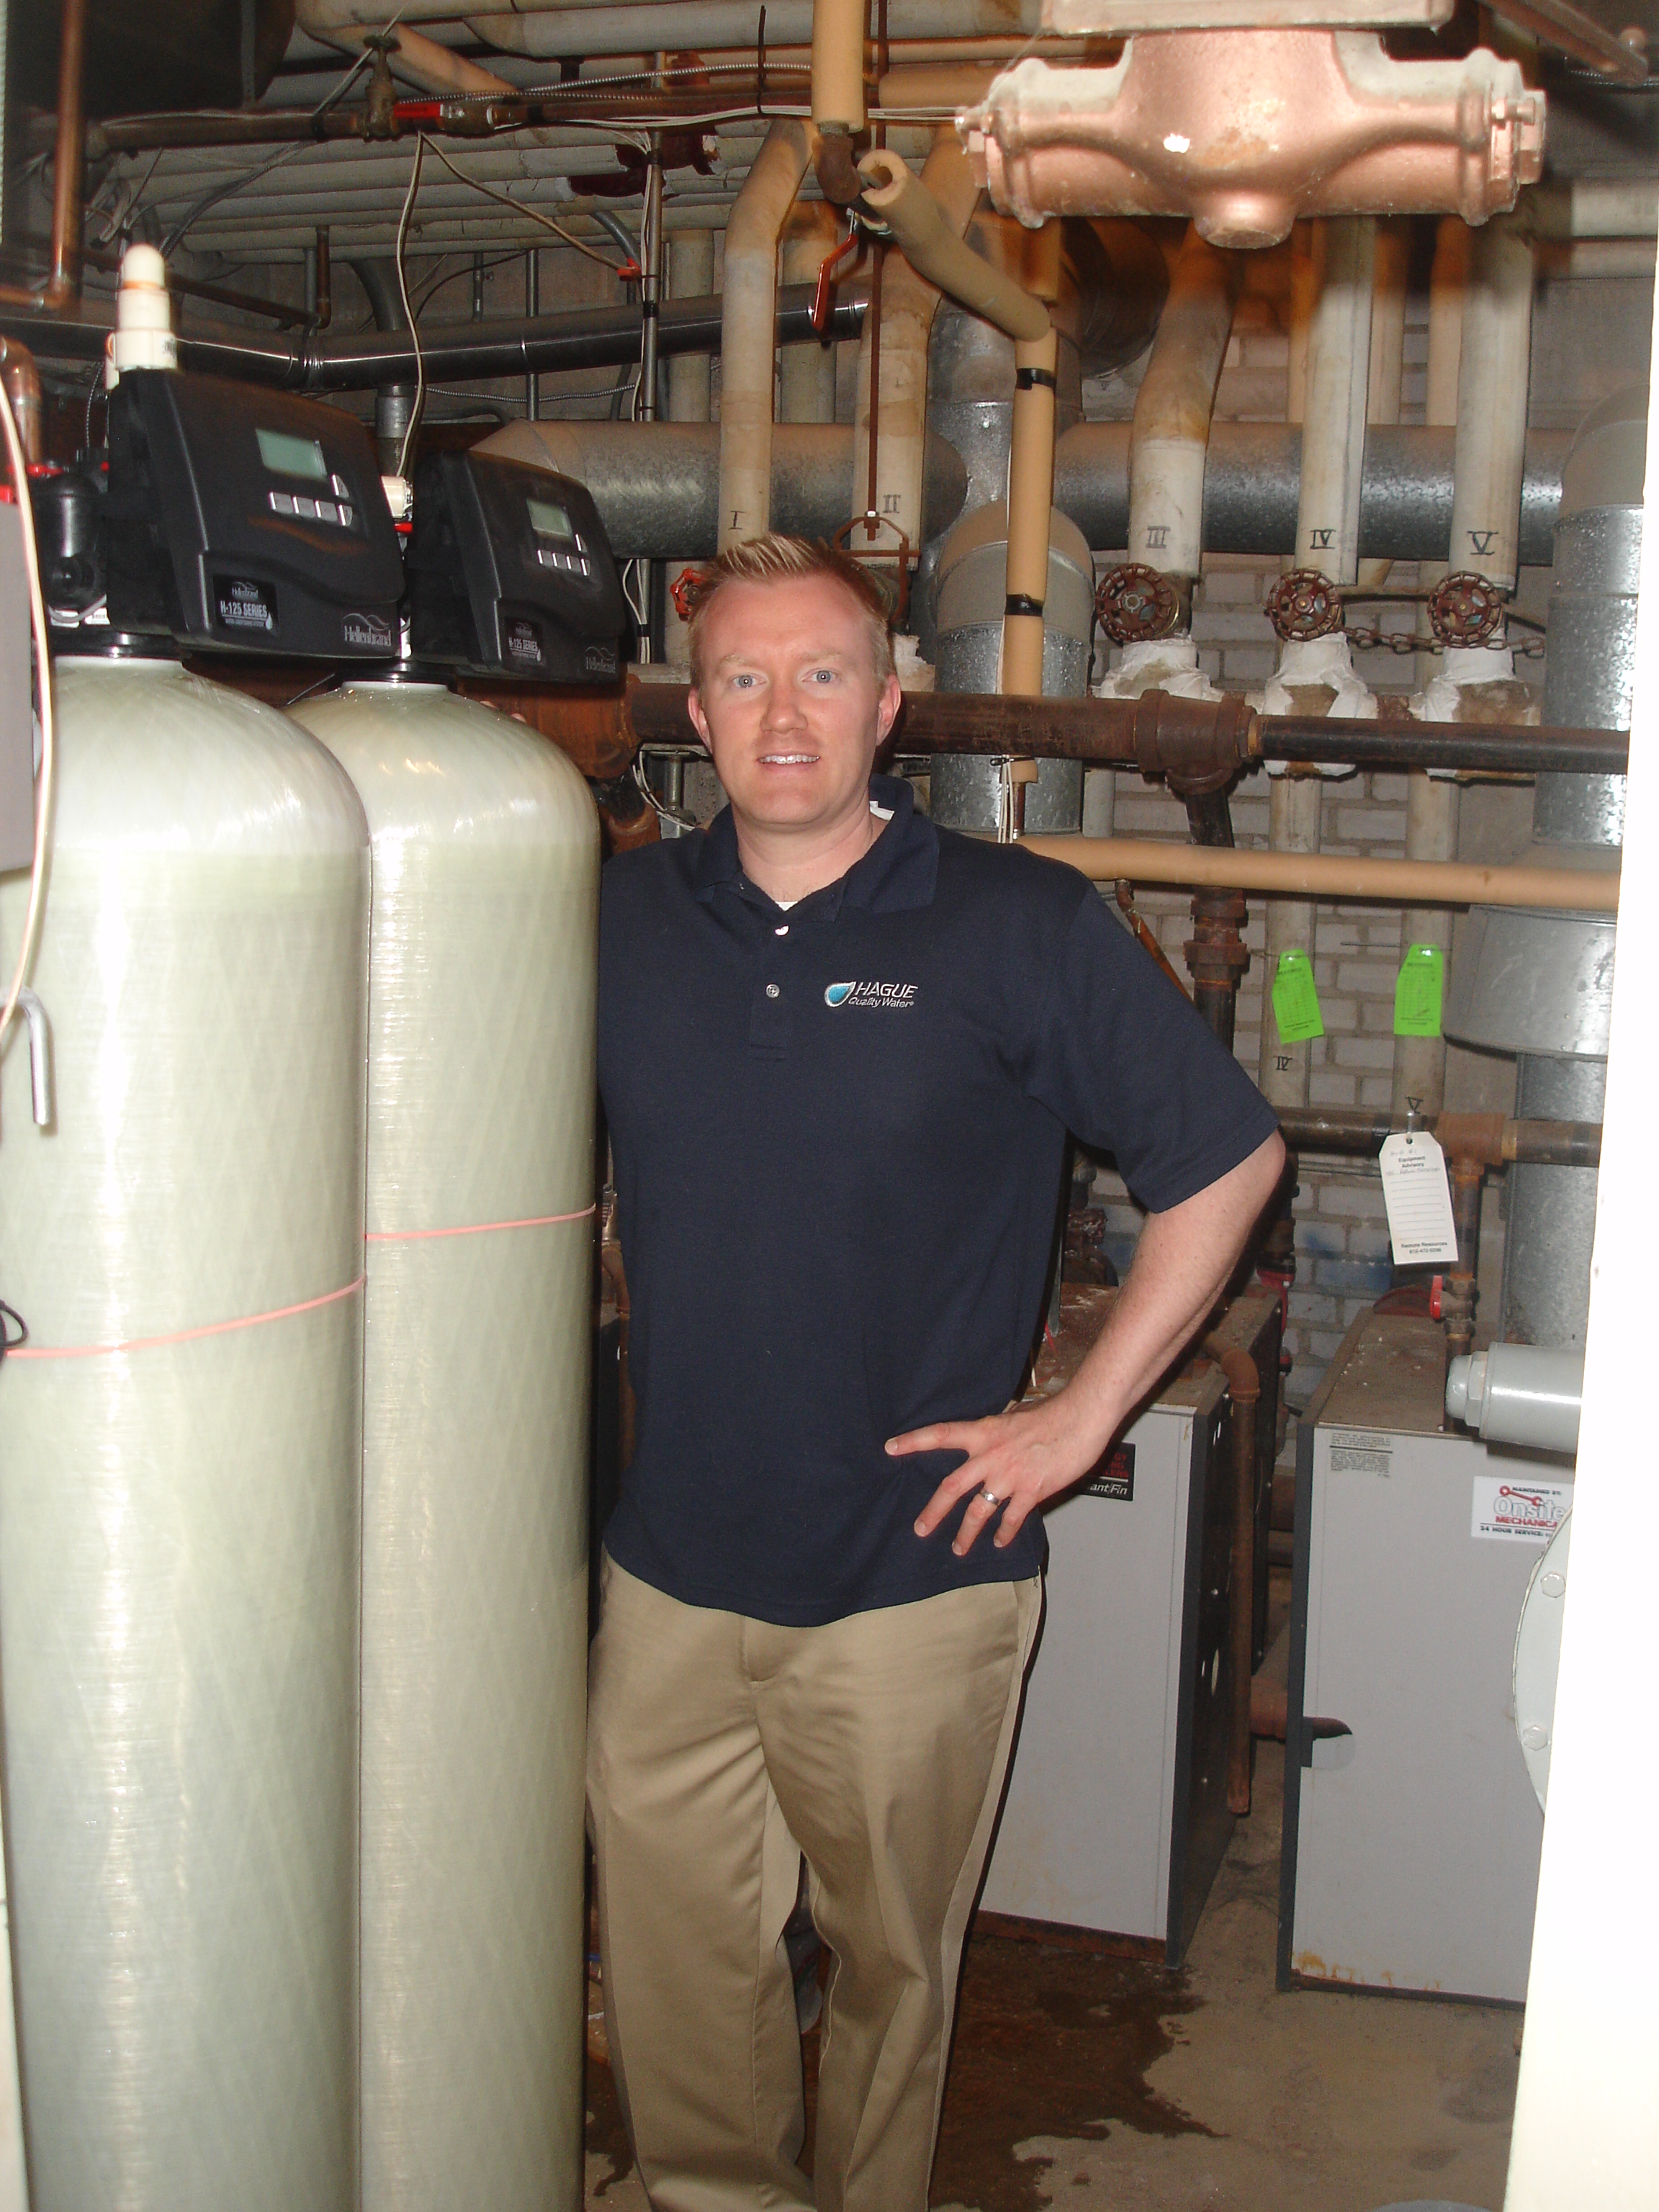 Grace Lutheran Church in Deephaven, MN cuts costs with Filtered Water